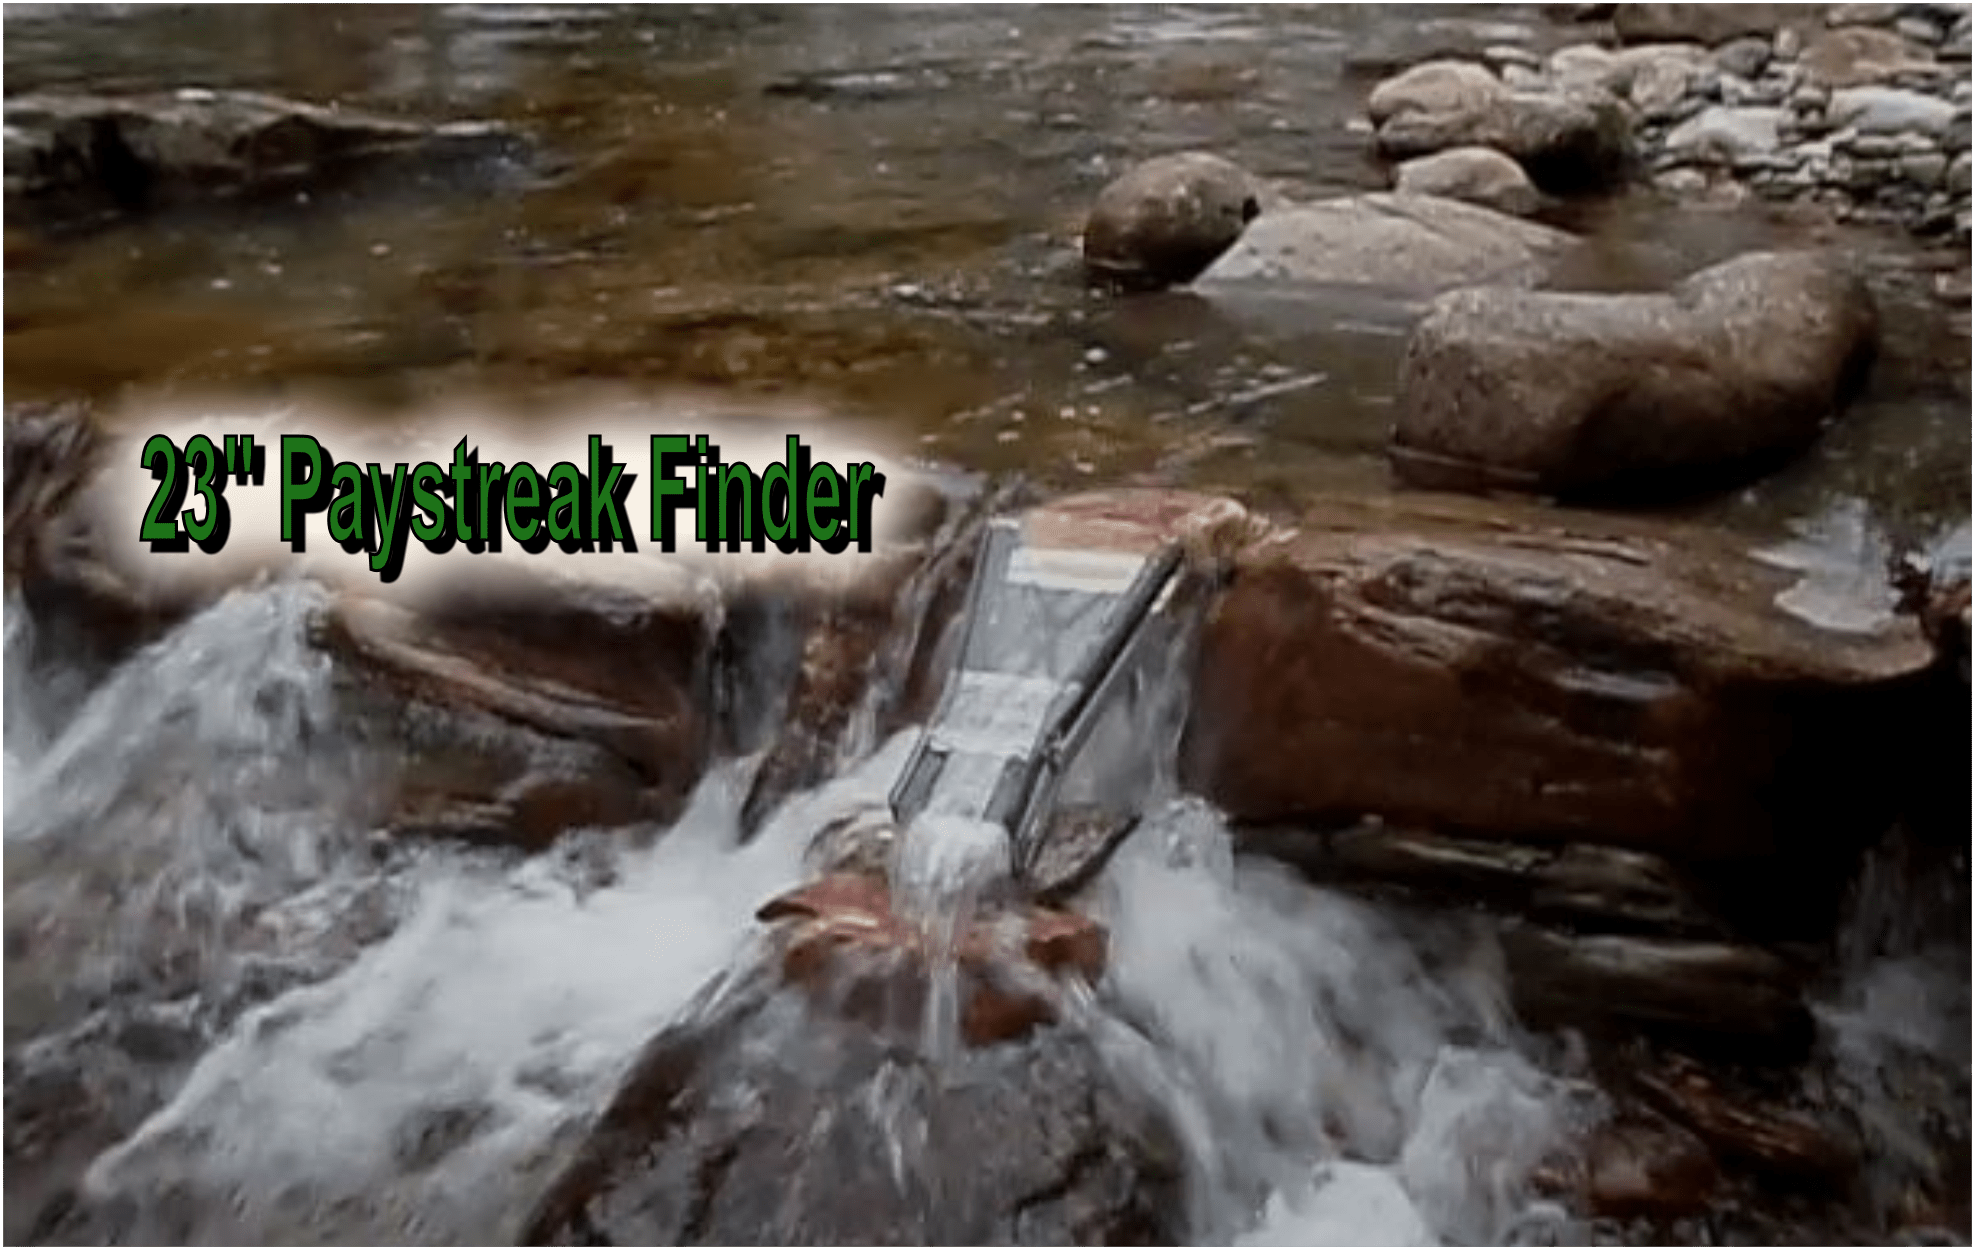 Green Mountain Gold Trap - 23" EZ Cleanout Pay Streak Finder Fluid Bed Sluice at Work in Stream